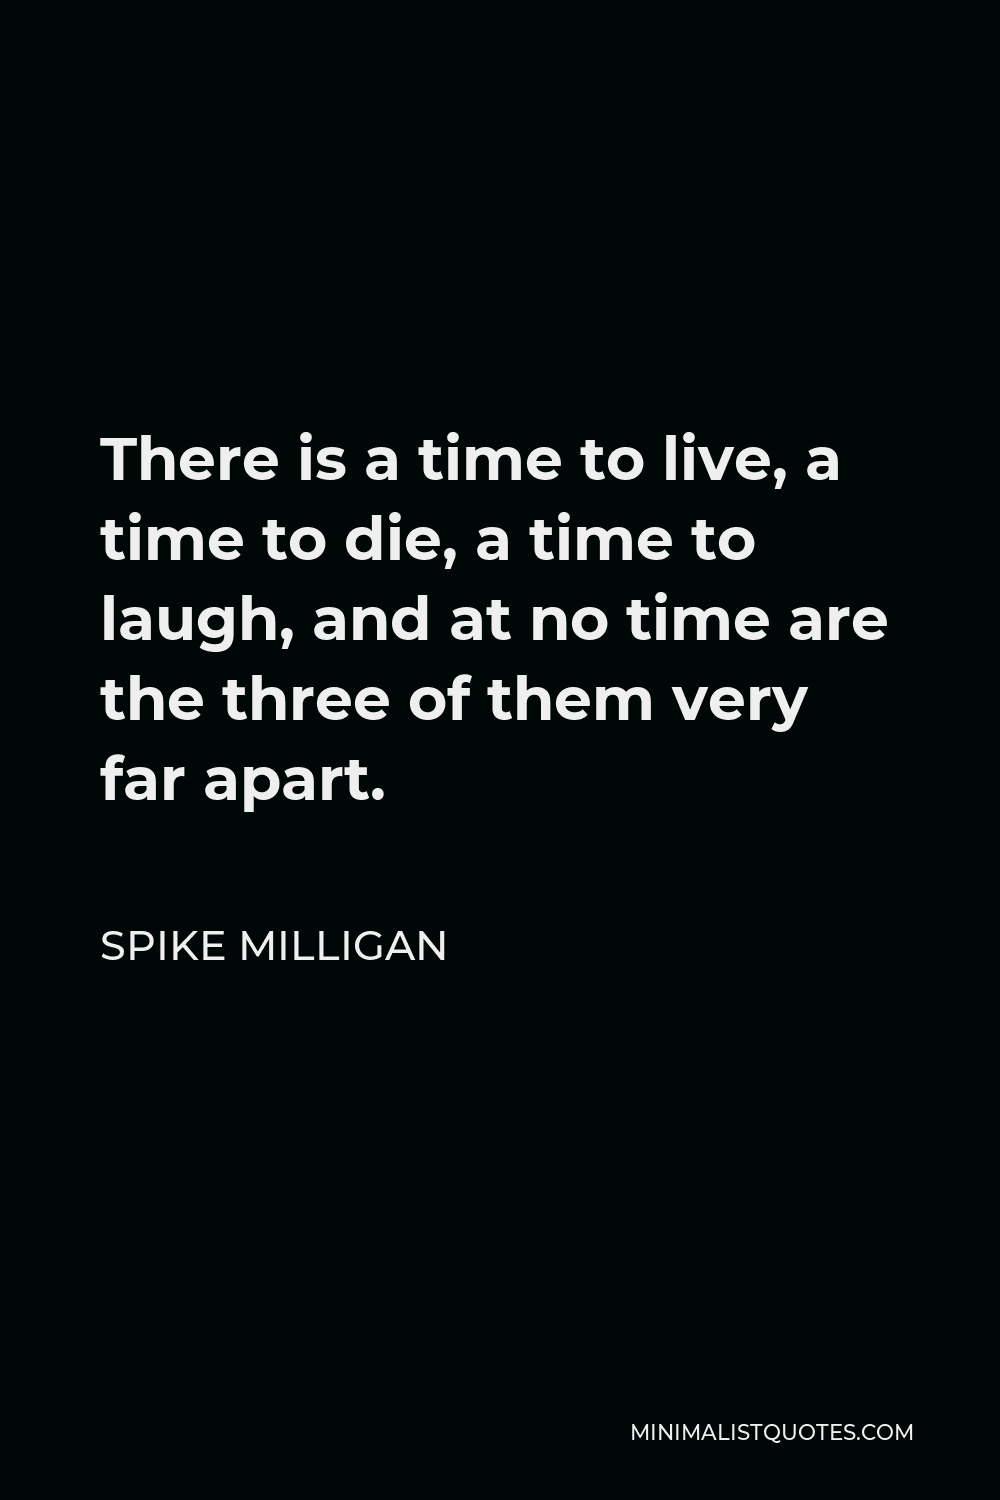 Spike Milligan Quote - There is a time to live, a time to die, a time to laugh, and at no time are the three of them very far apart.